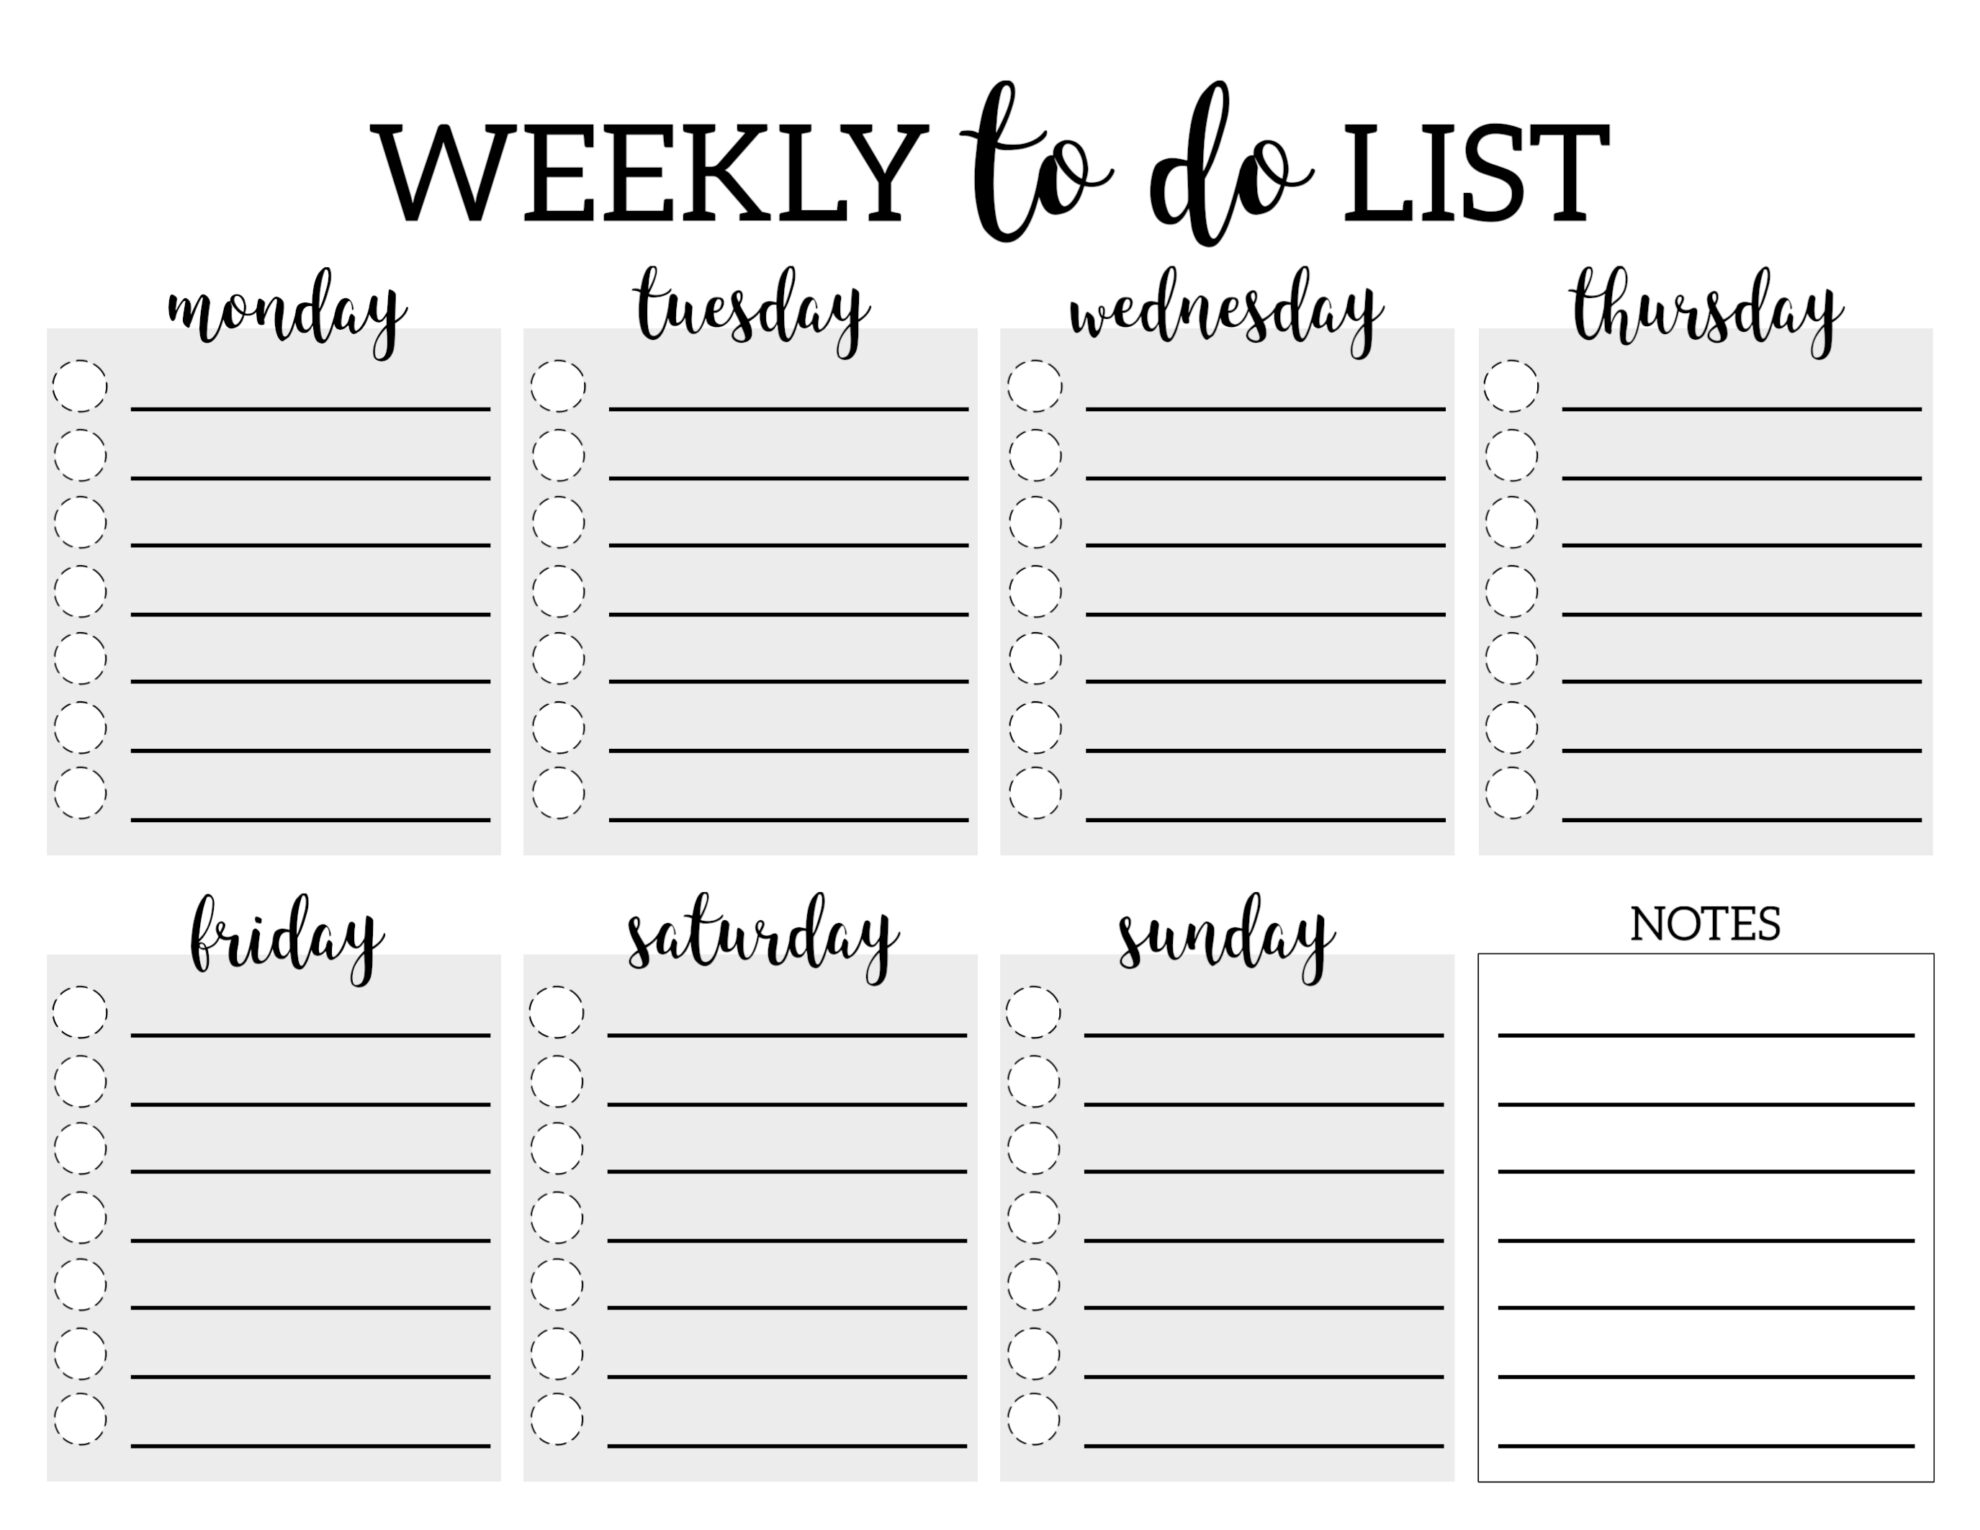 Collect Monday – Friday To Do List